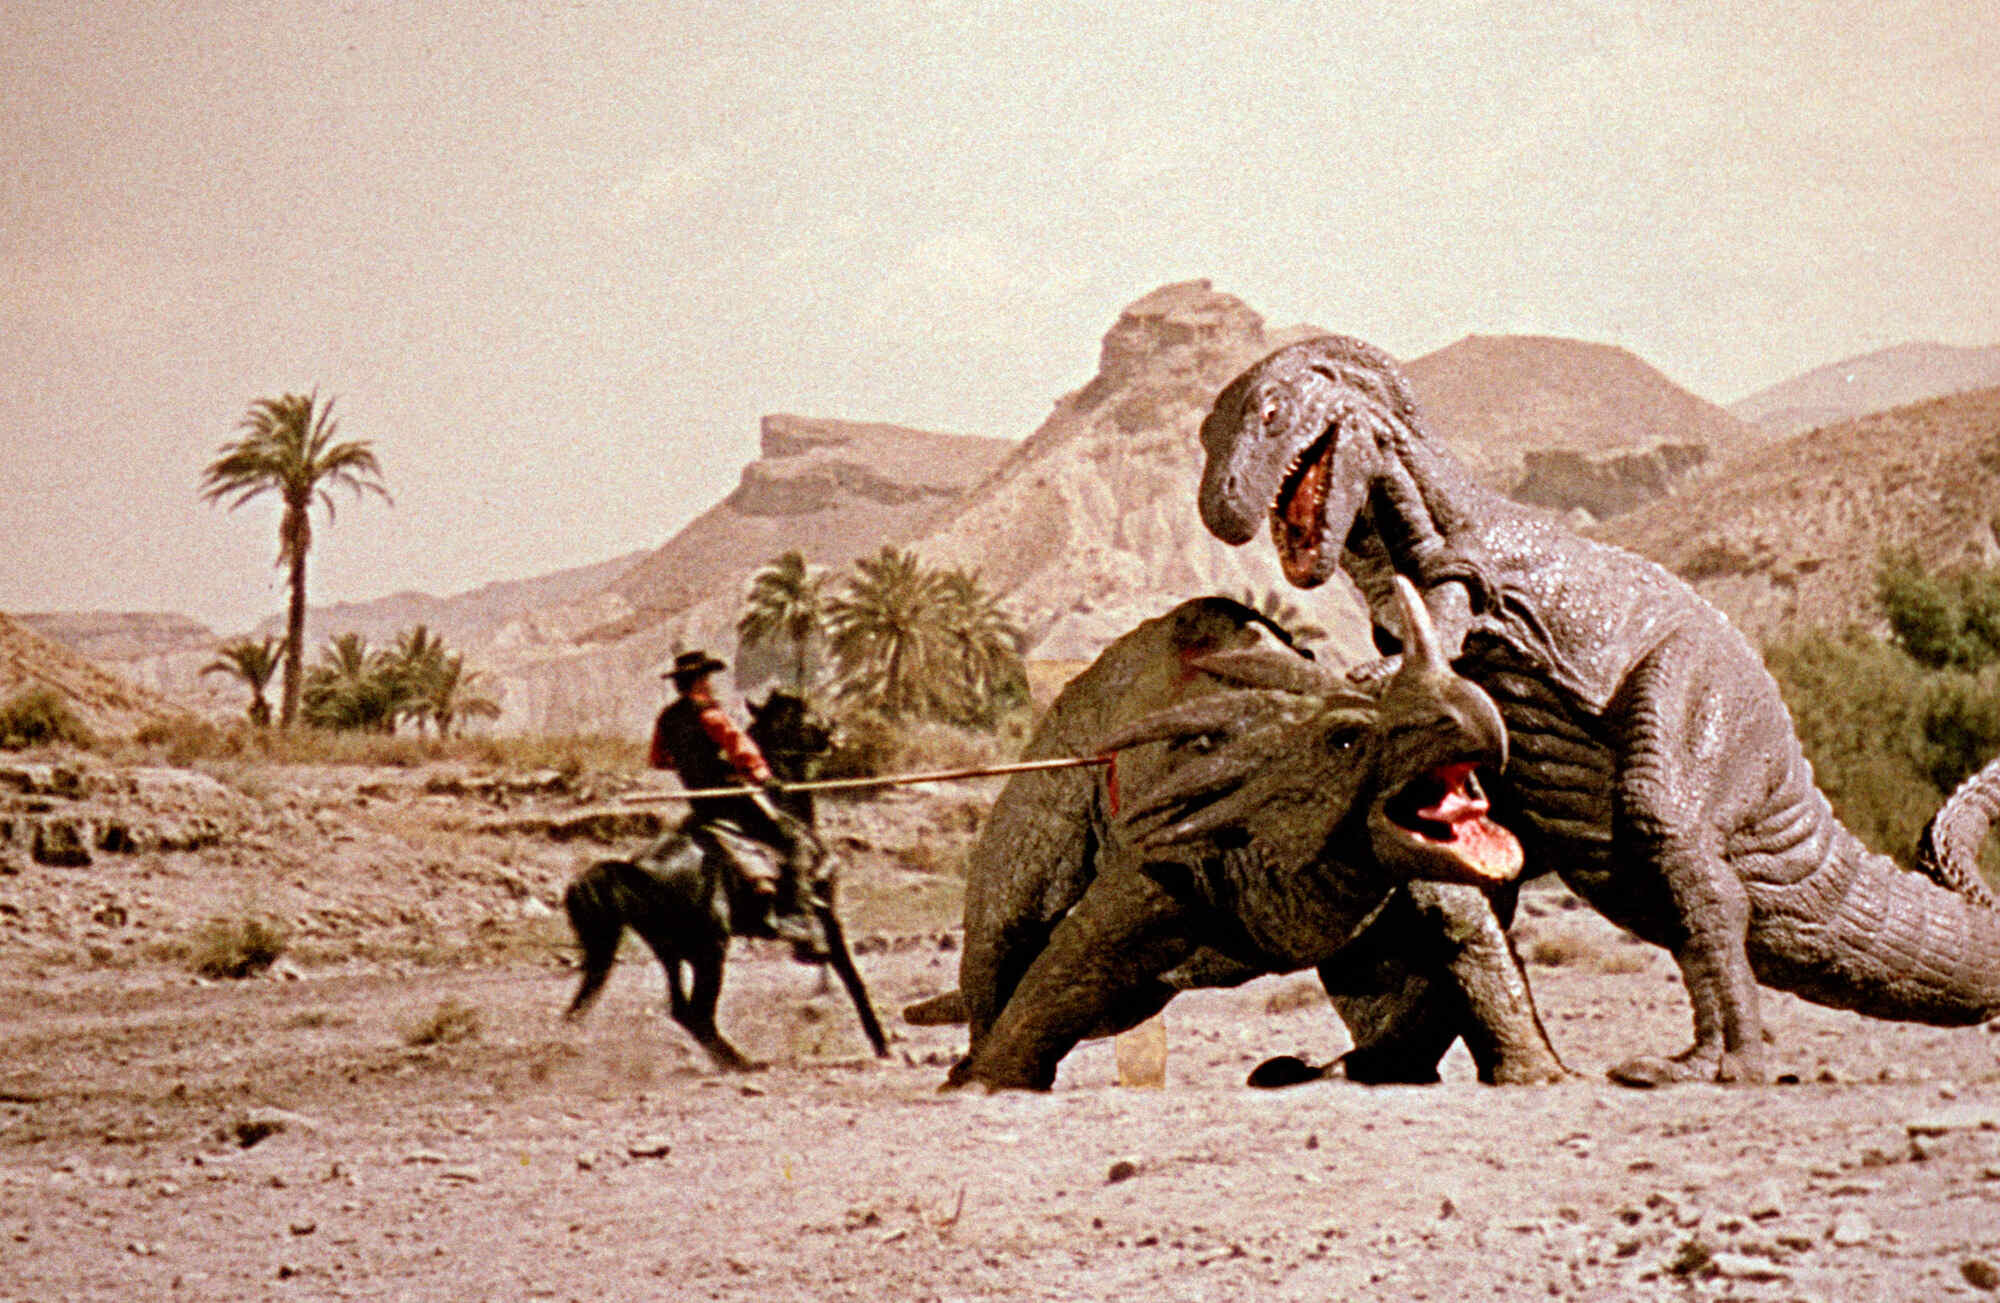 48-facts-about-the-movie-the-valley-of-gwangi